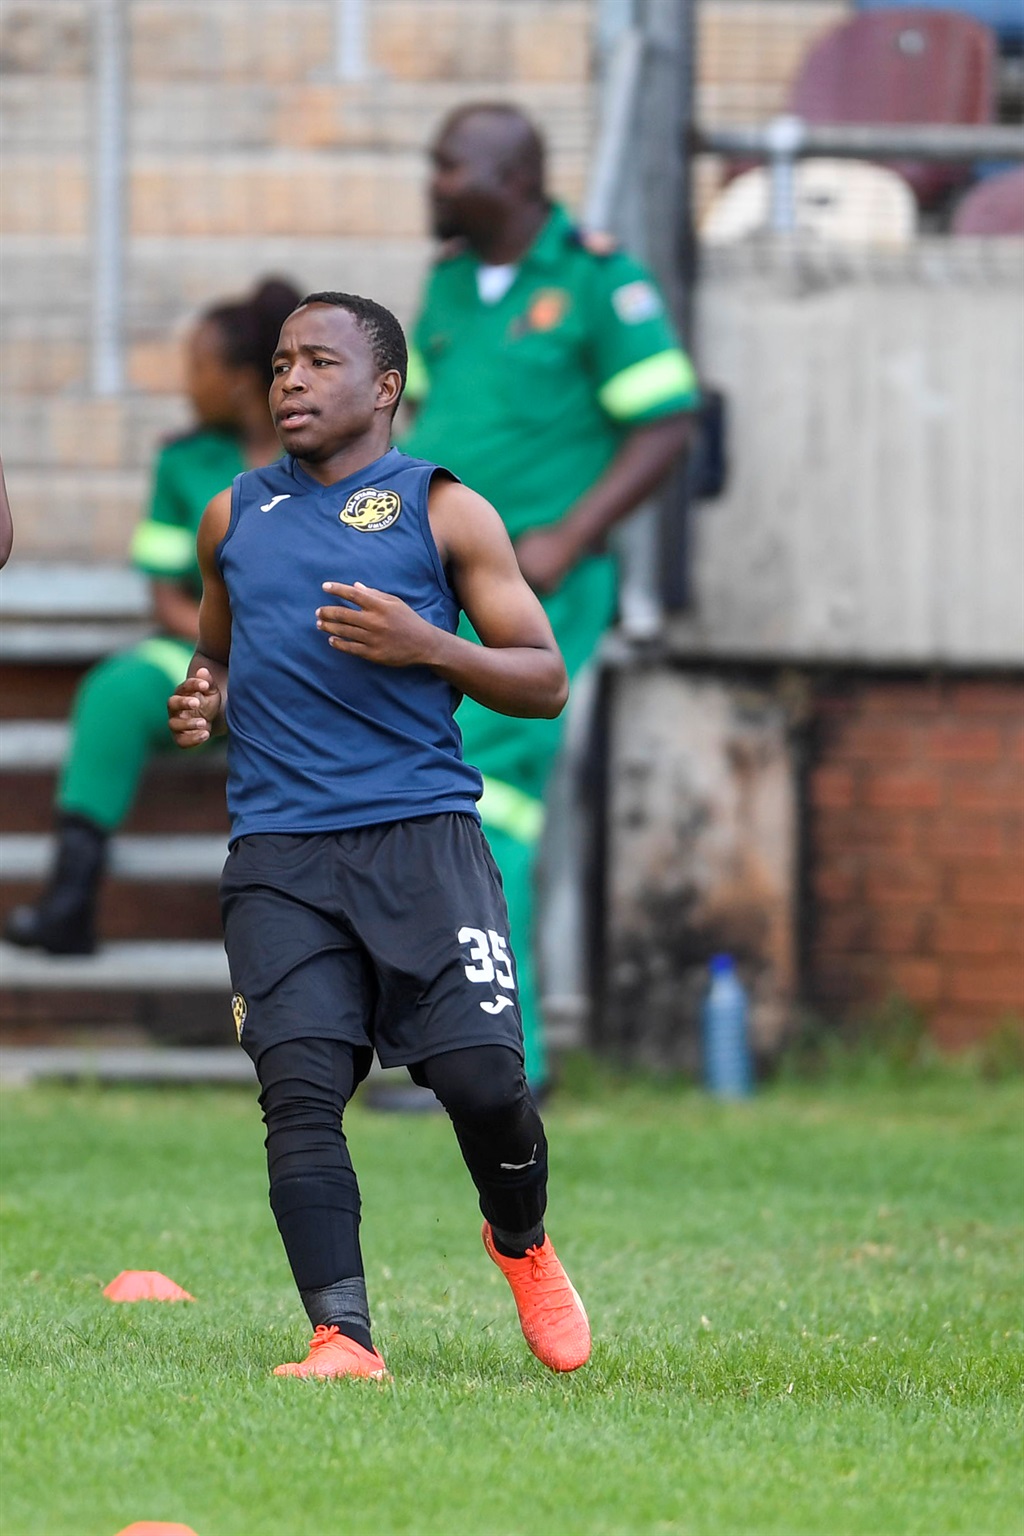 PRETORIA, SOUTH AFRICA - FEBRUARY 05:   Keletso Makgalwa of All Stars during the Motsepe Foundation Championship match between All Stars and Pretoria Callies FC at Soshanguve Giant Stadium on February 05, 2023 in Pretoria, South Africa. (Photo by Lefty Shivambu/Gallo Images)